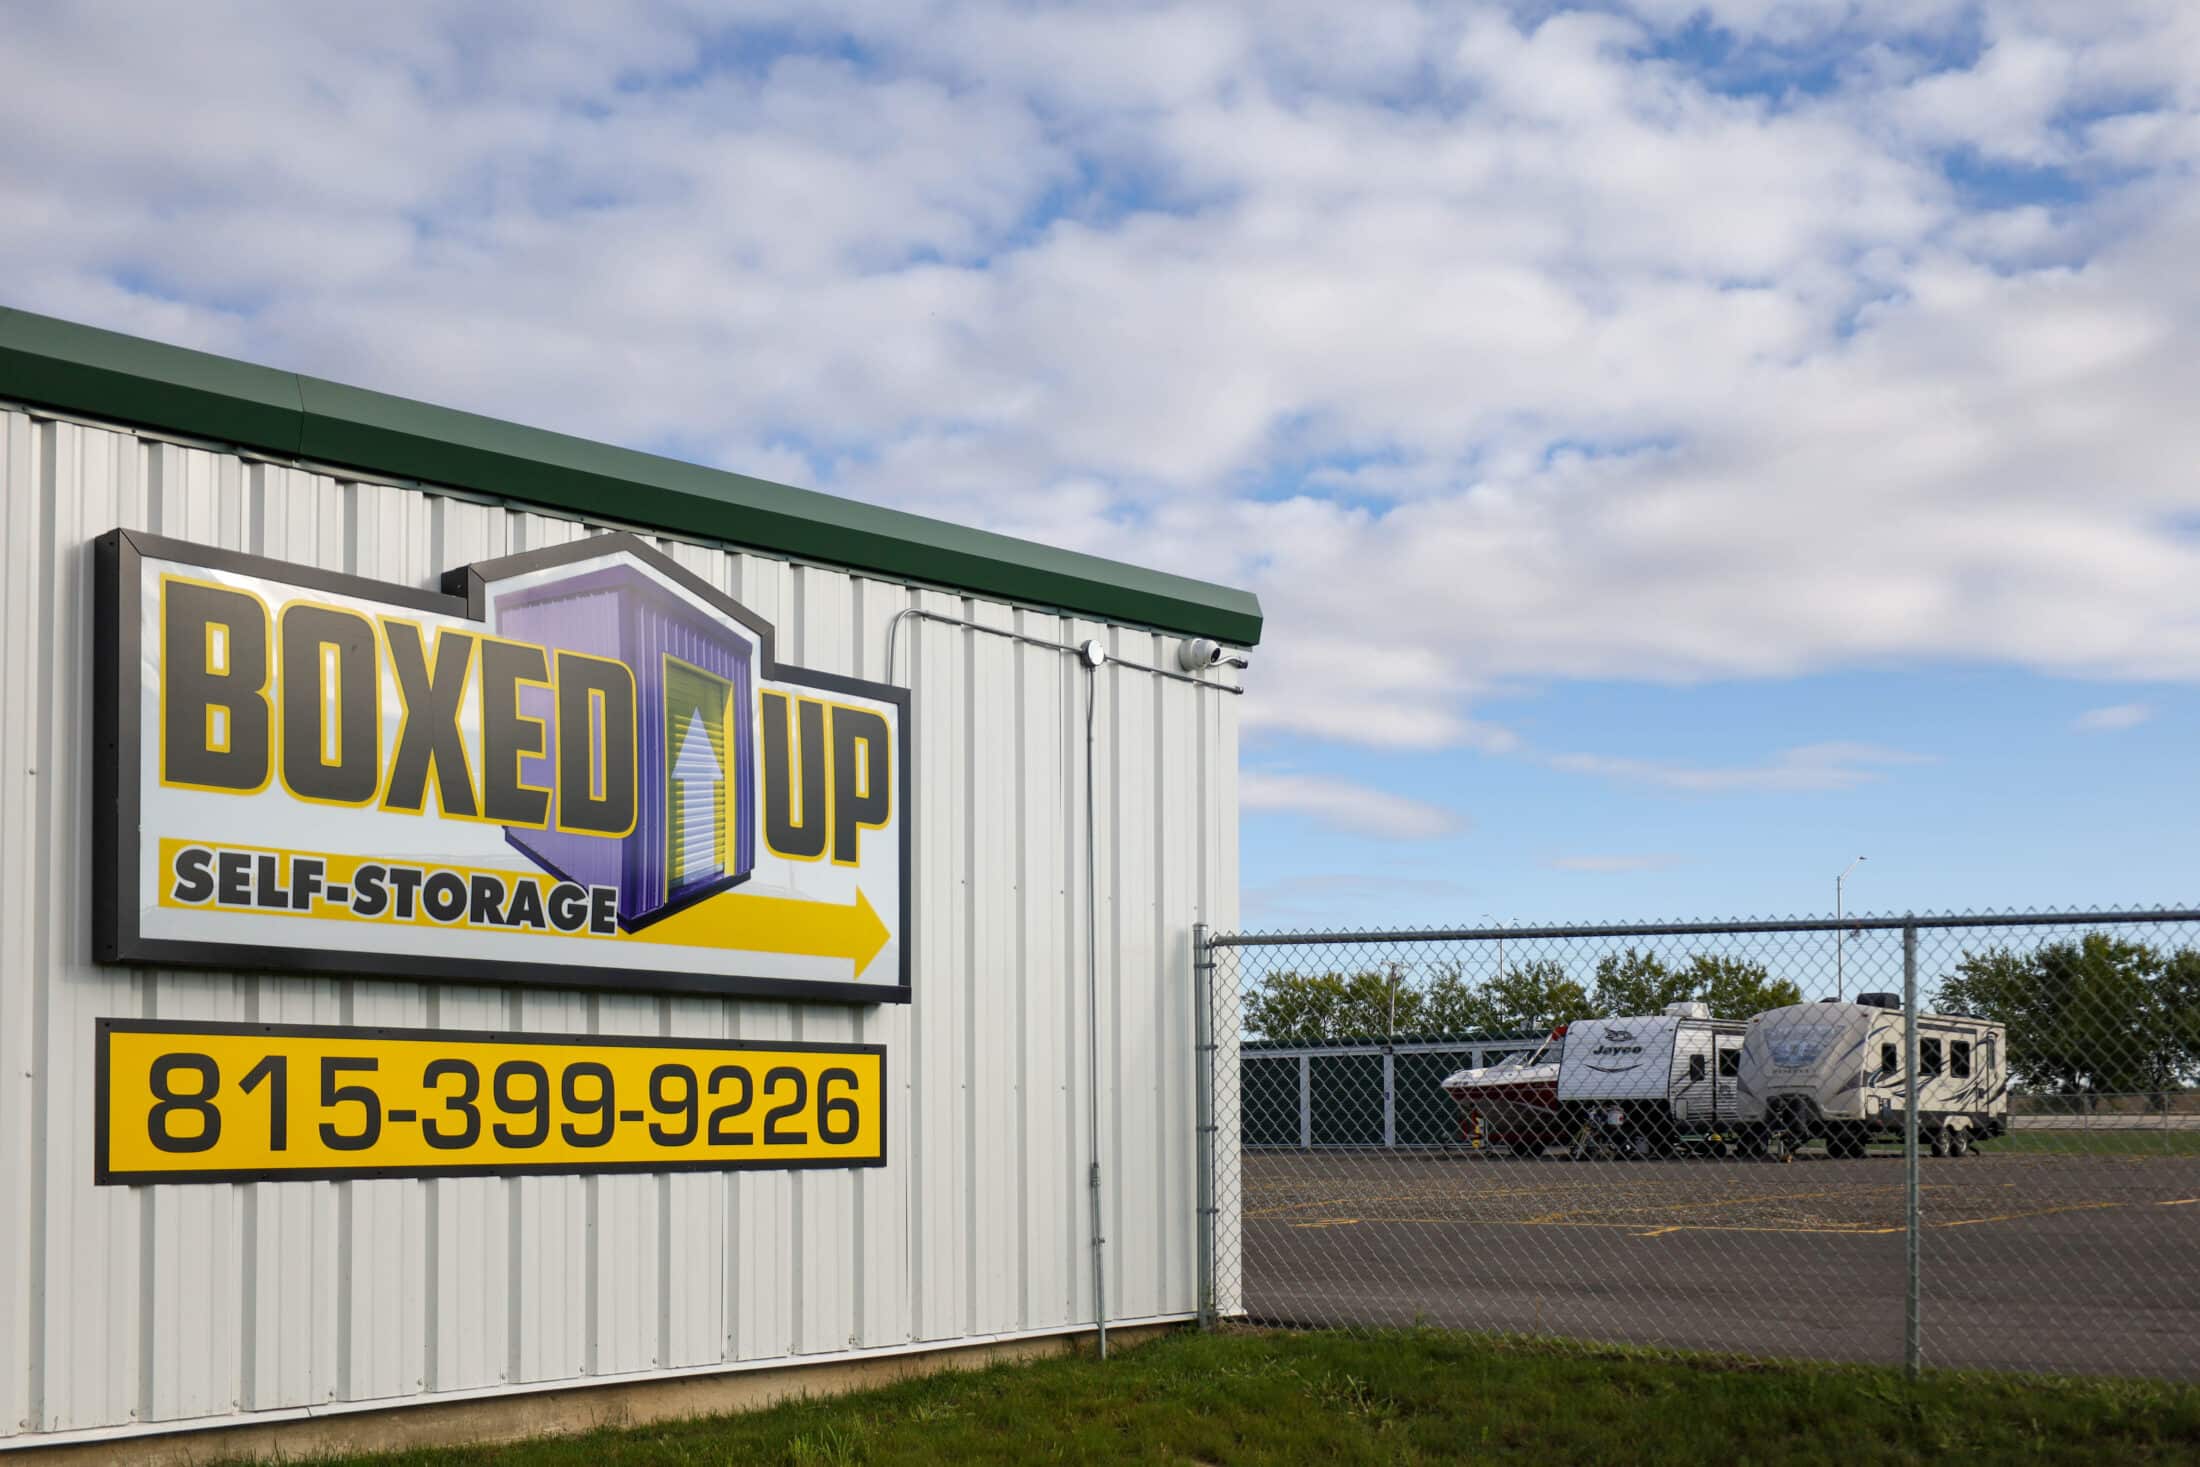 Boxed Up Self-Storage in Belvidere Illinois. Parking for any sized vehicle from Bikes and cars to Semi trucks, buses, boats and more.